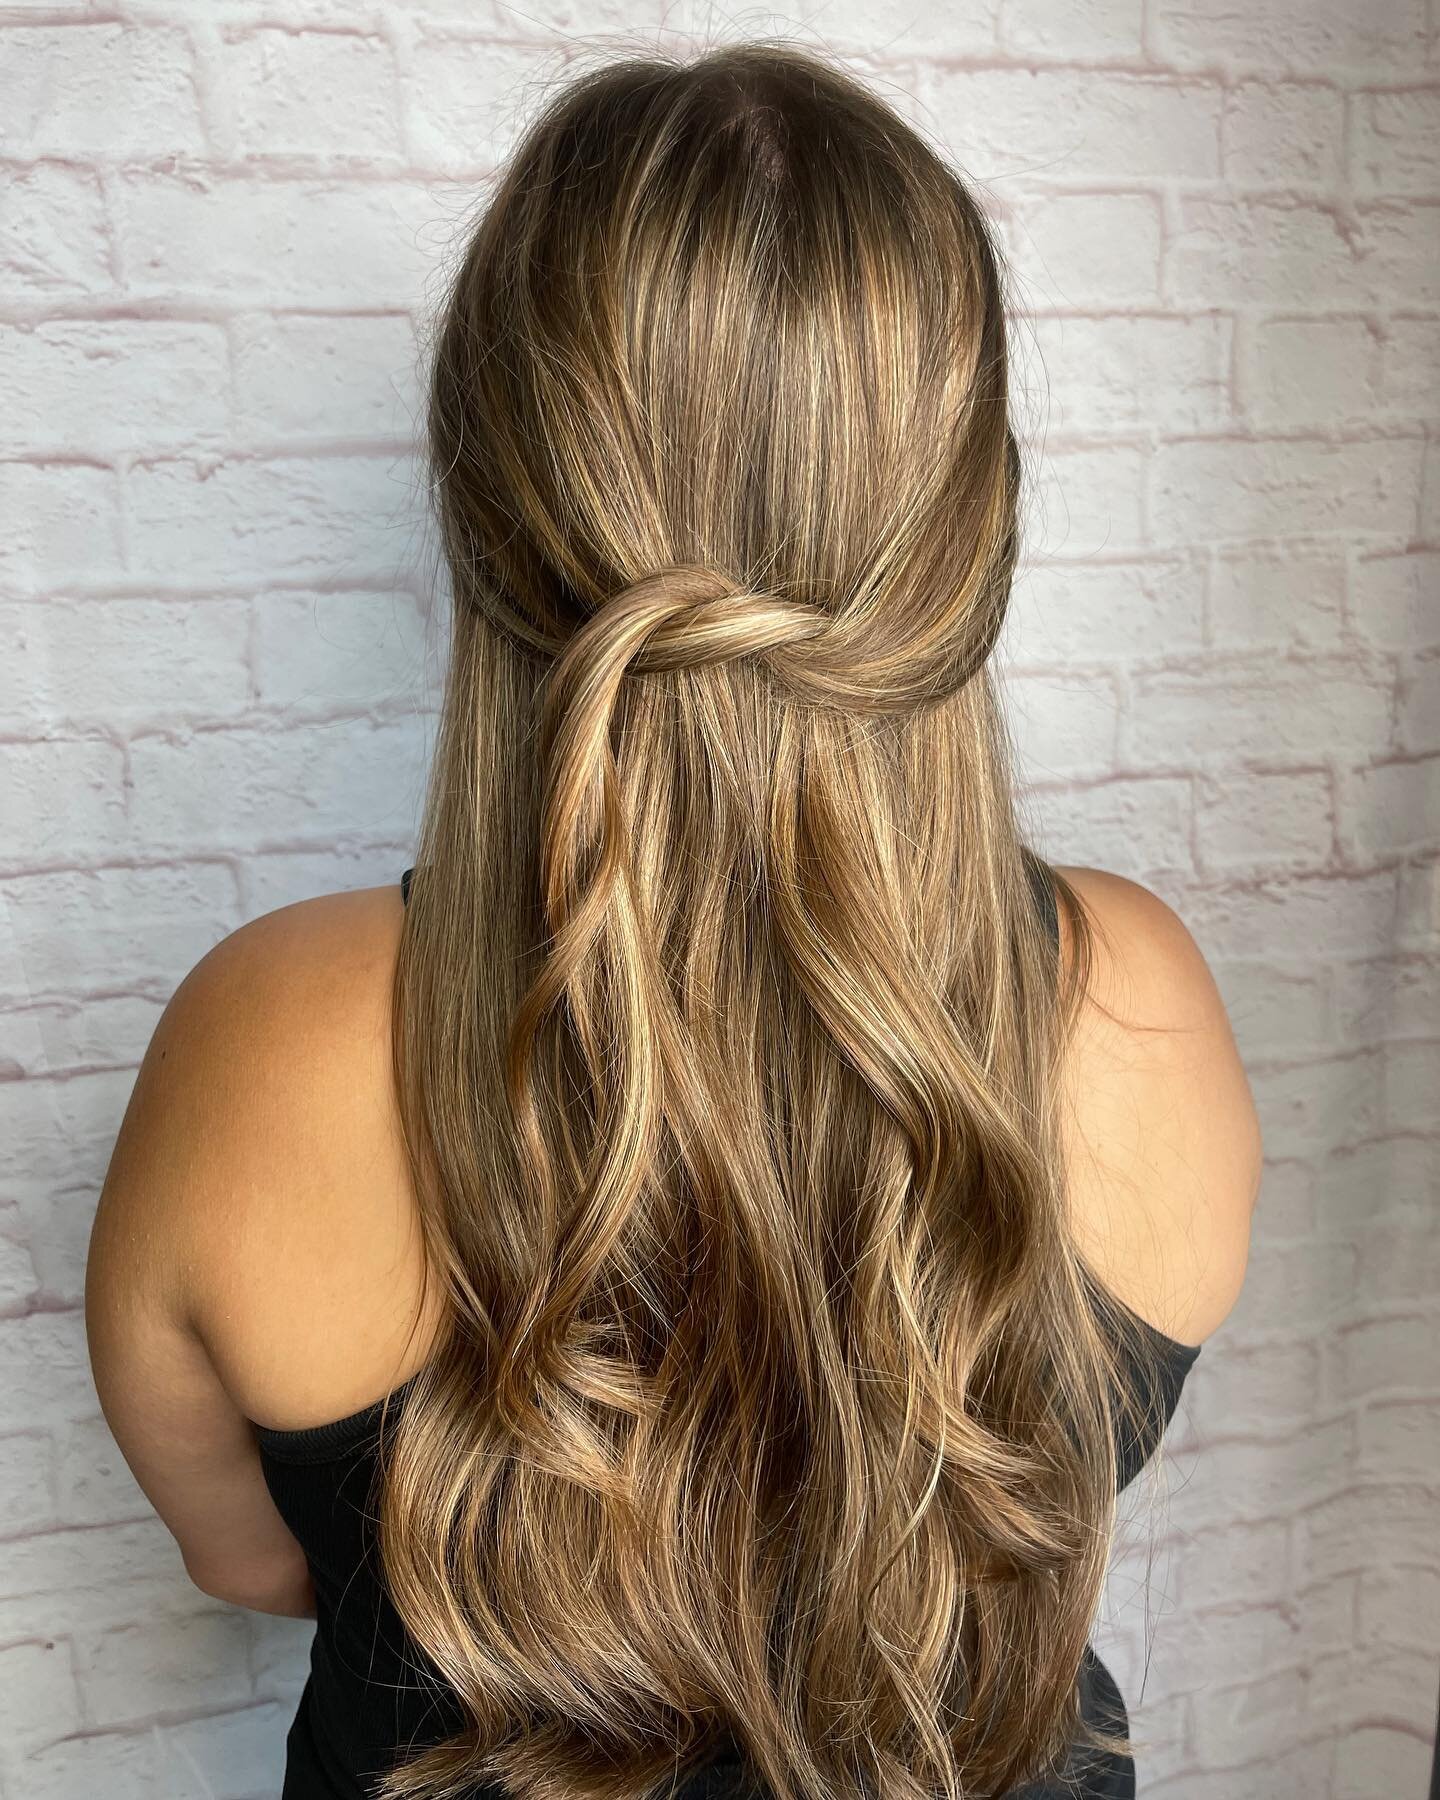 Full highlight and cut done by Lyza!
@lyza.hair 
.
.
.
.
.
.
.
.
#beauty #hairoftheday #hairstyles #beachywaves #wellaplex #hairinspo #balayage #behindthechair #paintedhair #prettyhaircolor #hairtransformation #balayagespecialist #balayageombre #colo